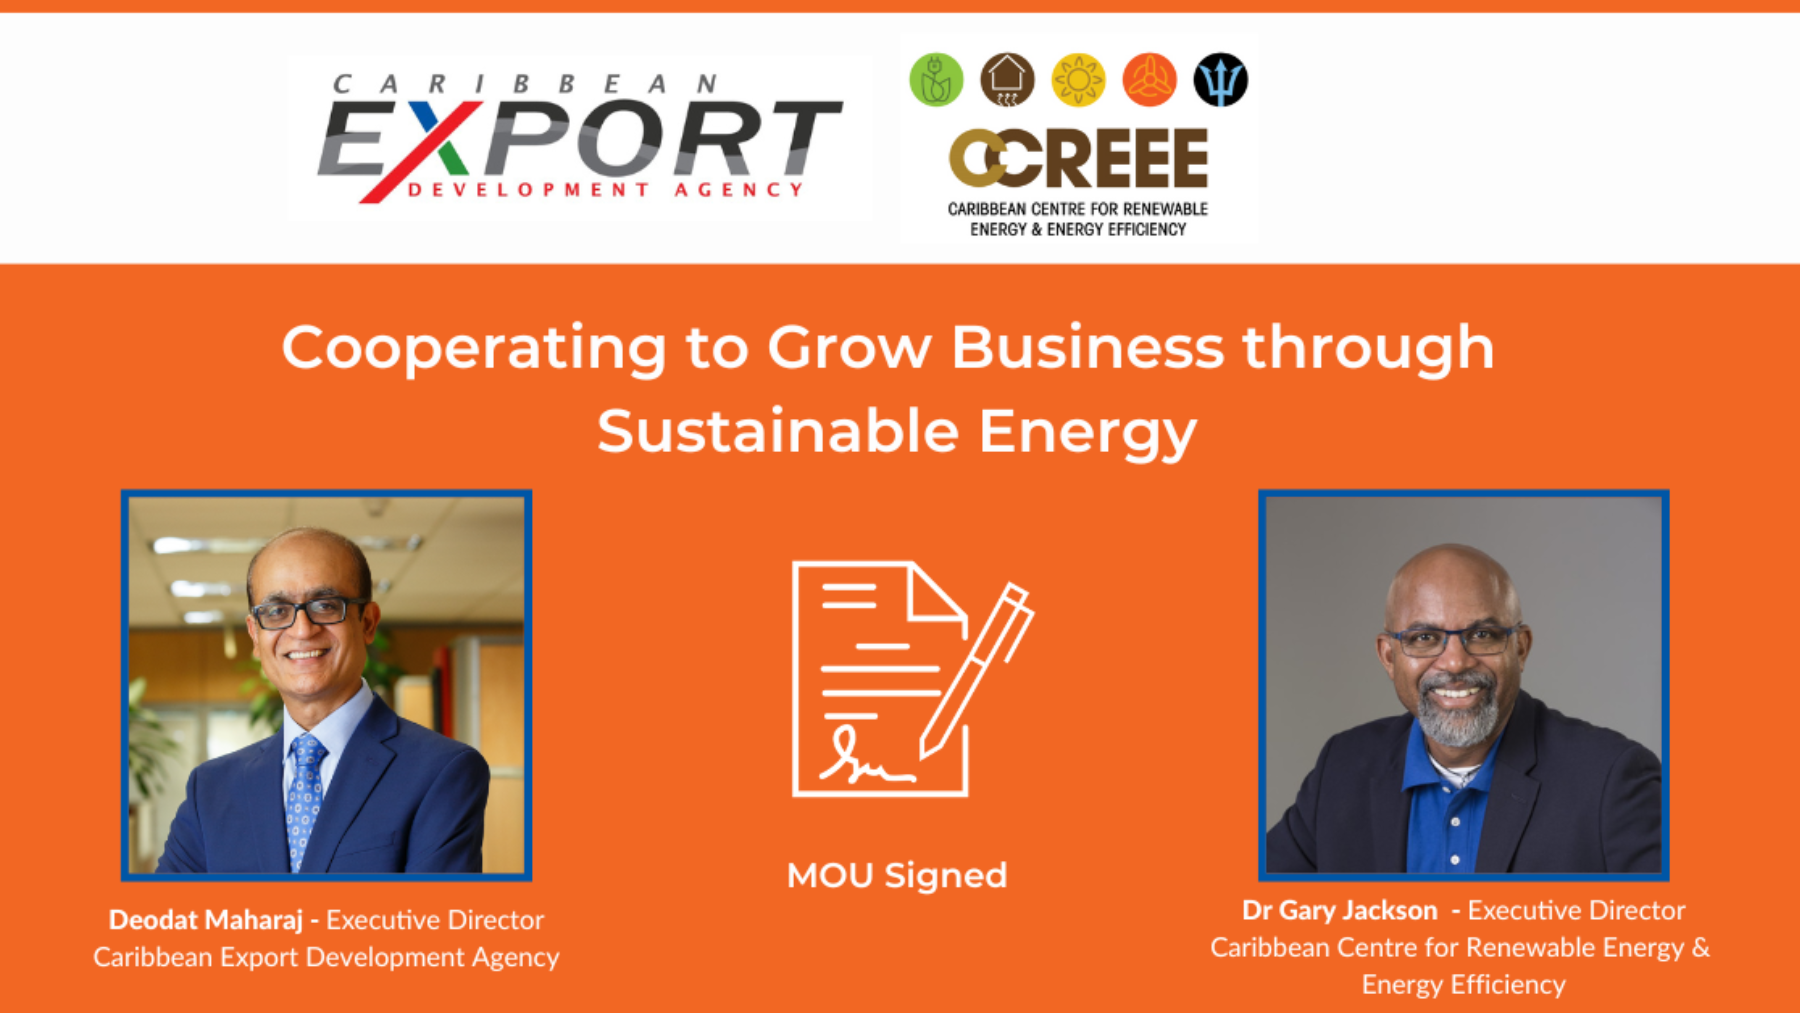 Caribbean Export and CCREEE Cooperate to Support Sustainable Energy Development and Create Jobs